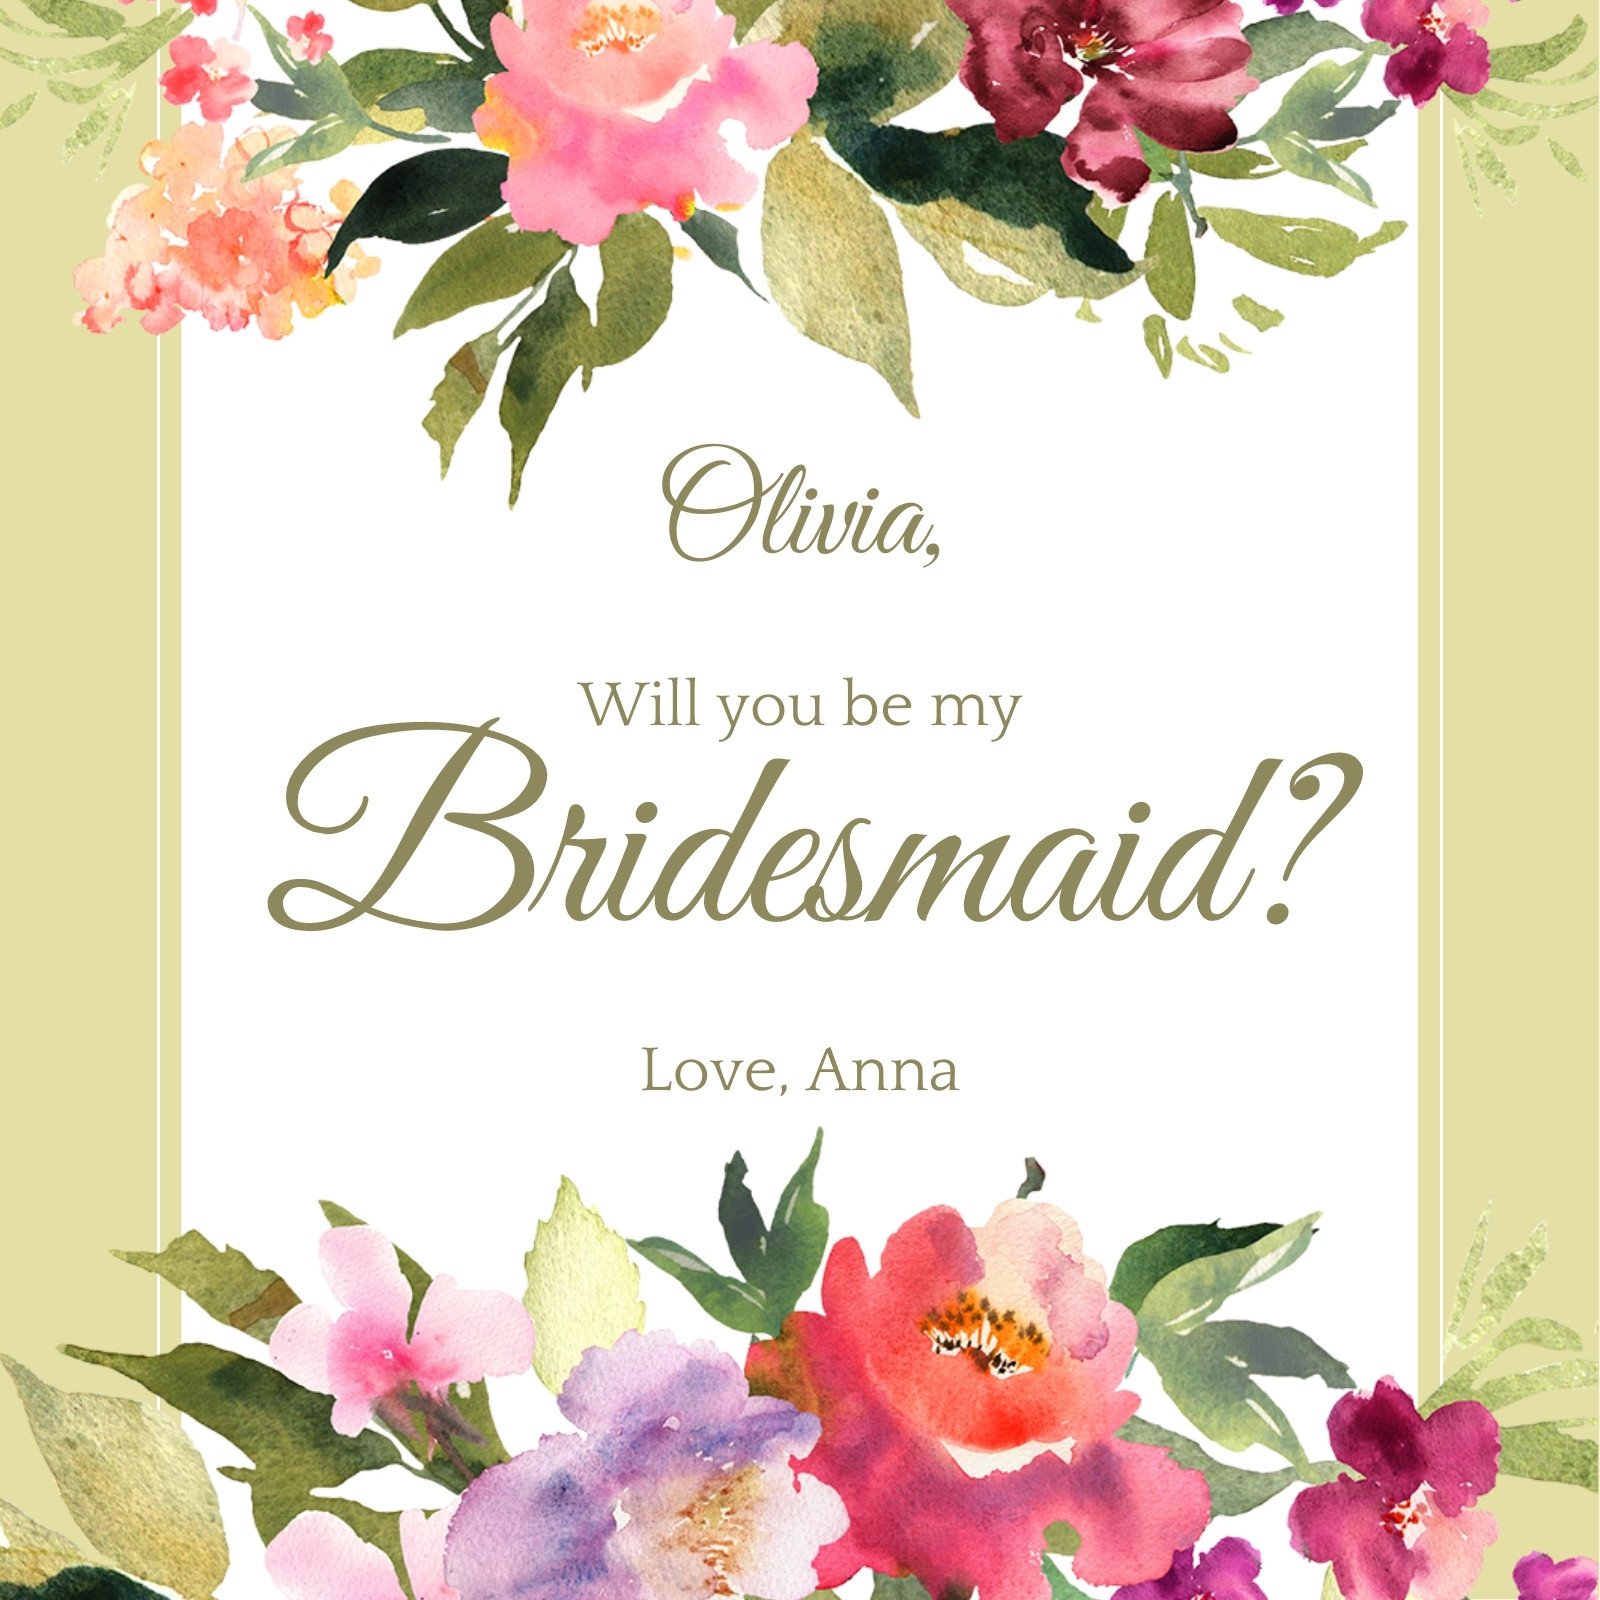 will-you-be-my-bridesmaid-proposal-card-editable-template-with-photo